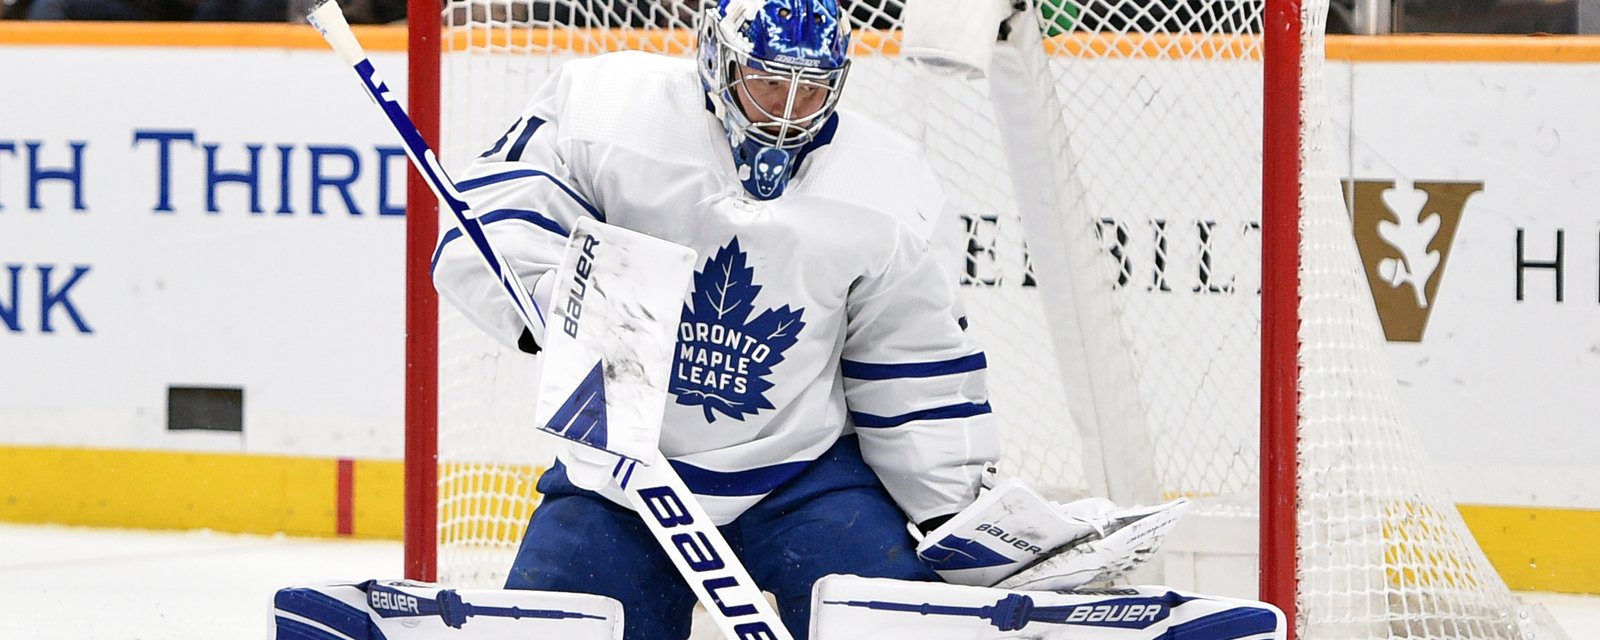 Leafs lose Andersen during game against Florida